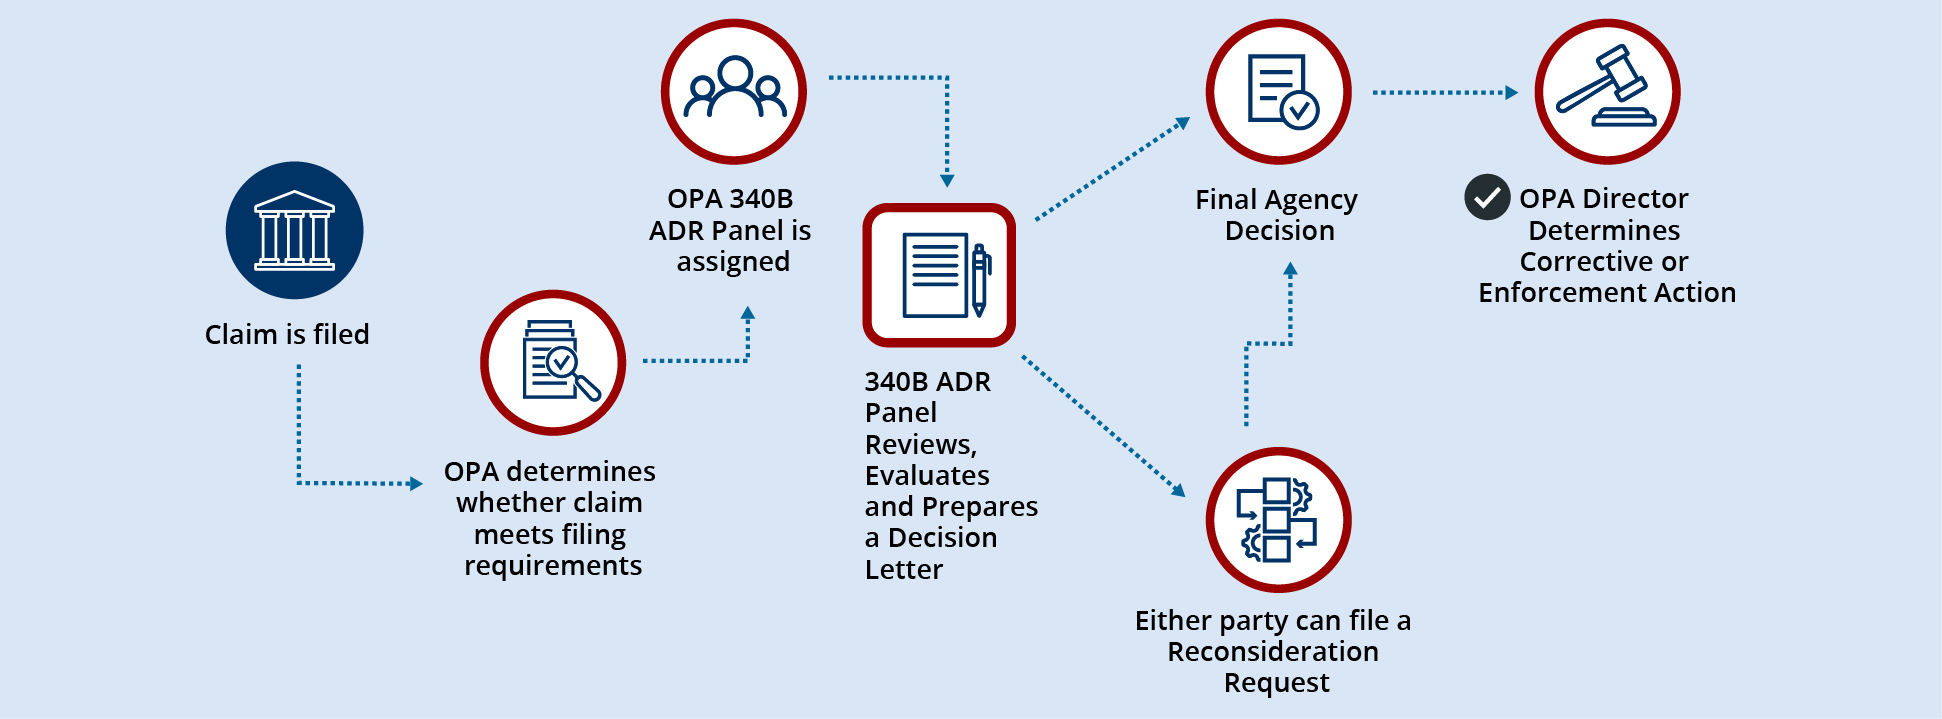 A flow chart depicting the ADR process. This process is detailed on this page under the heading "What are the steps in the ADR Process?"